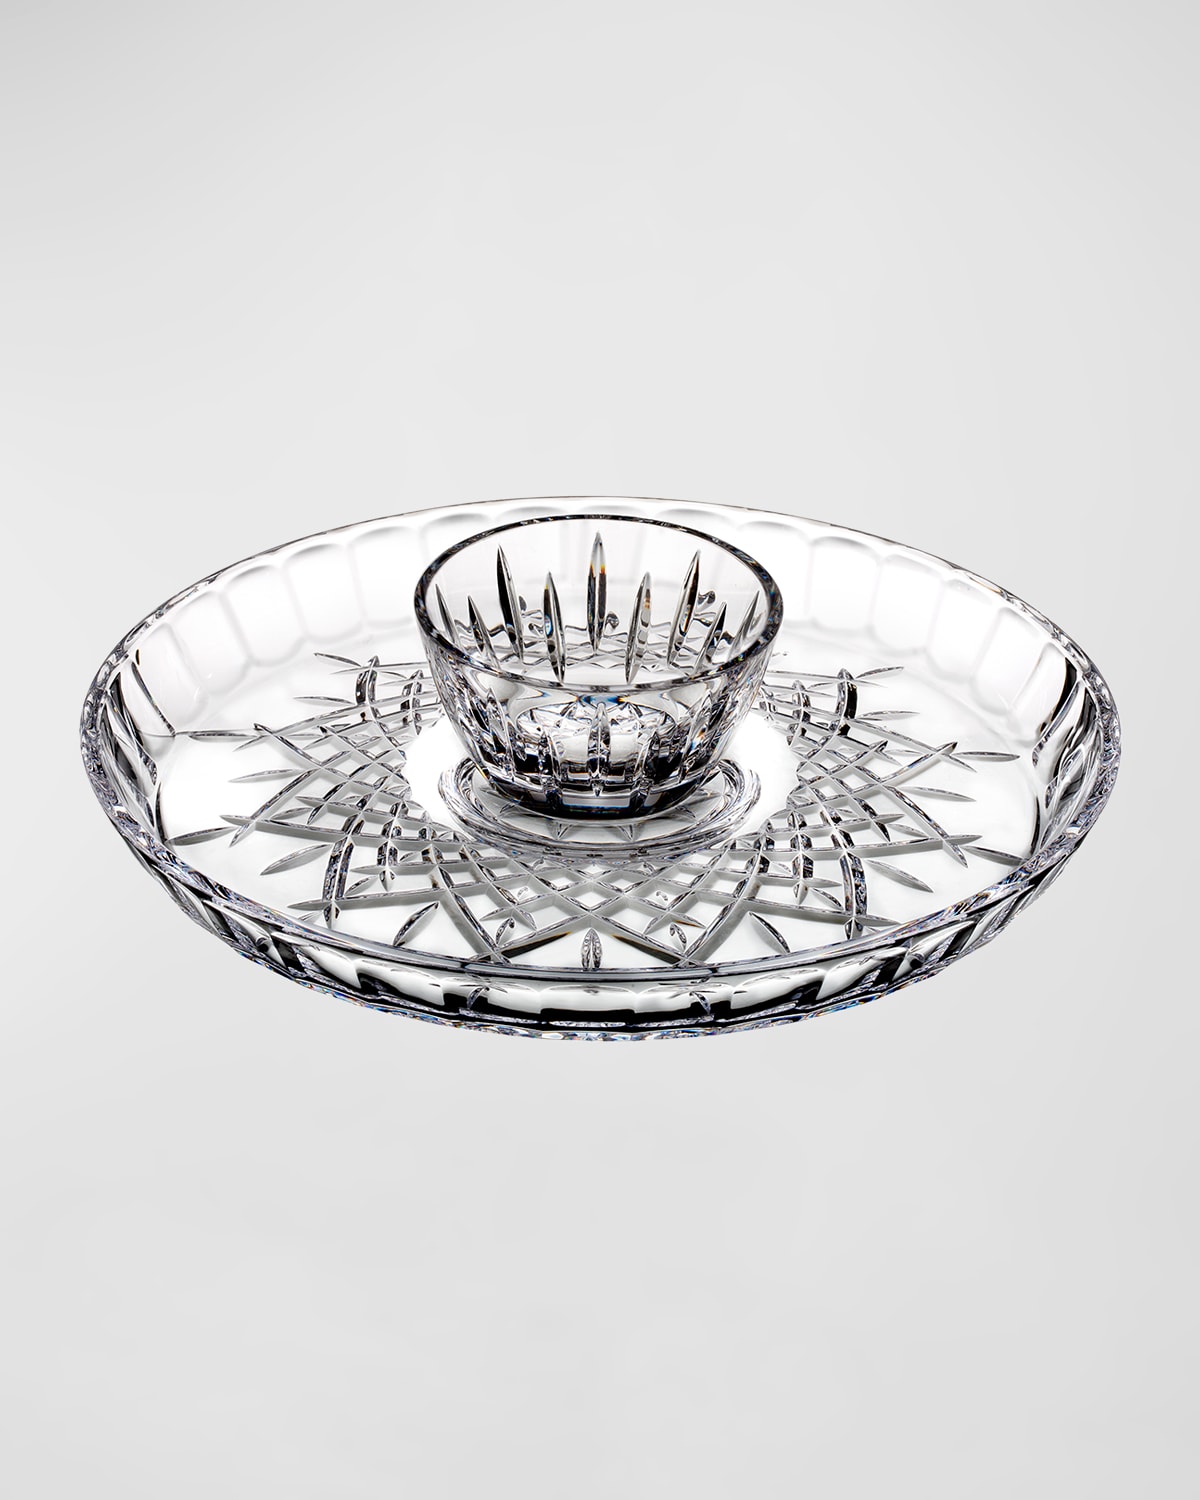 Marquis By Waterford Markham Chip & Dip Server